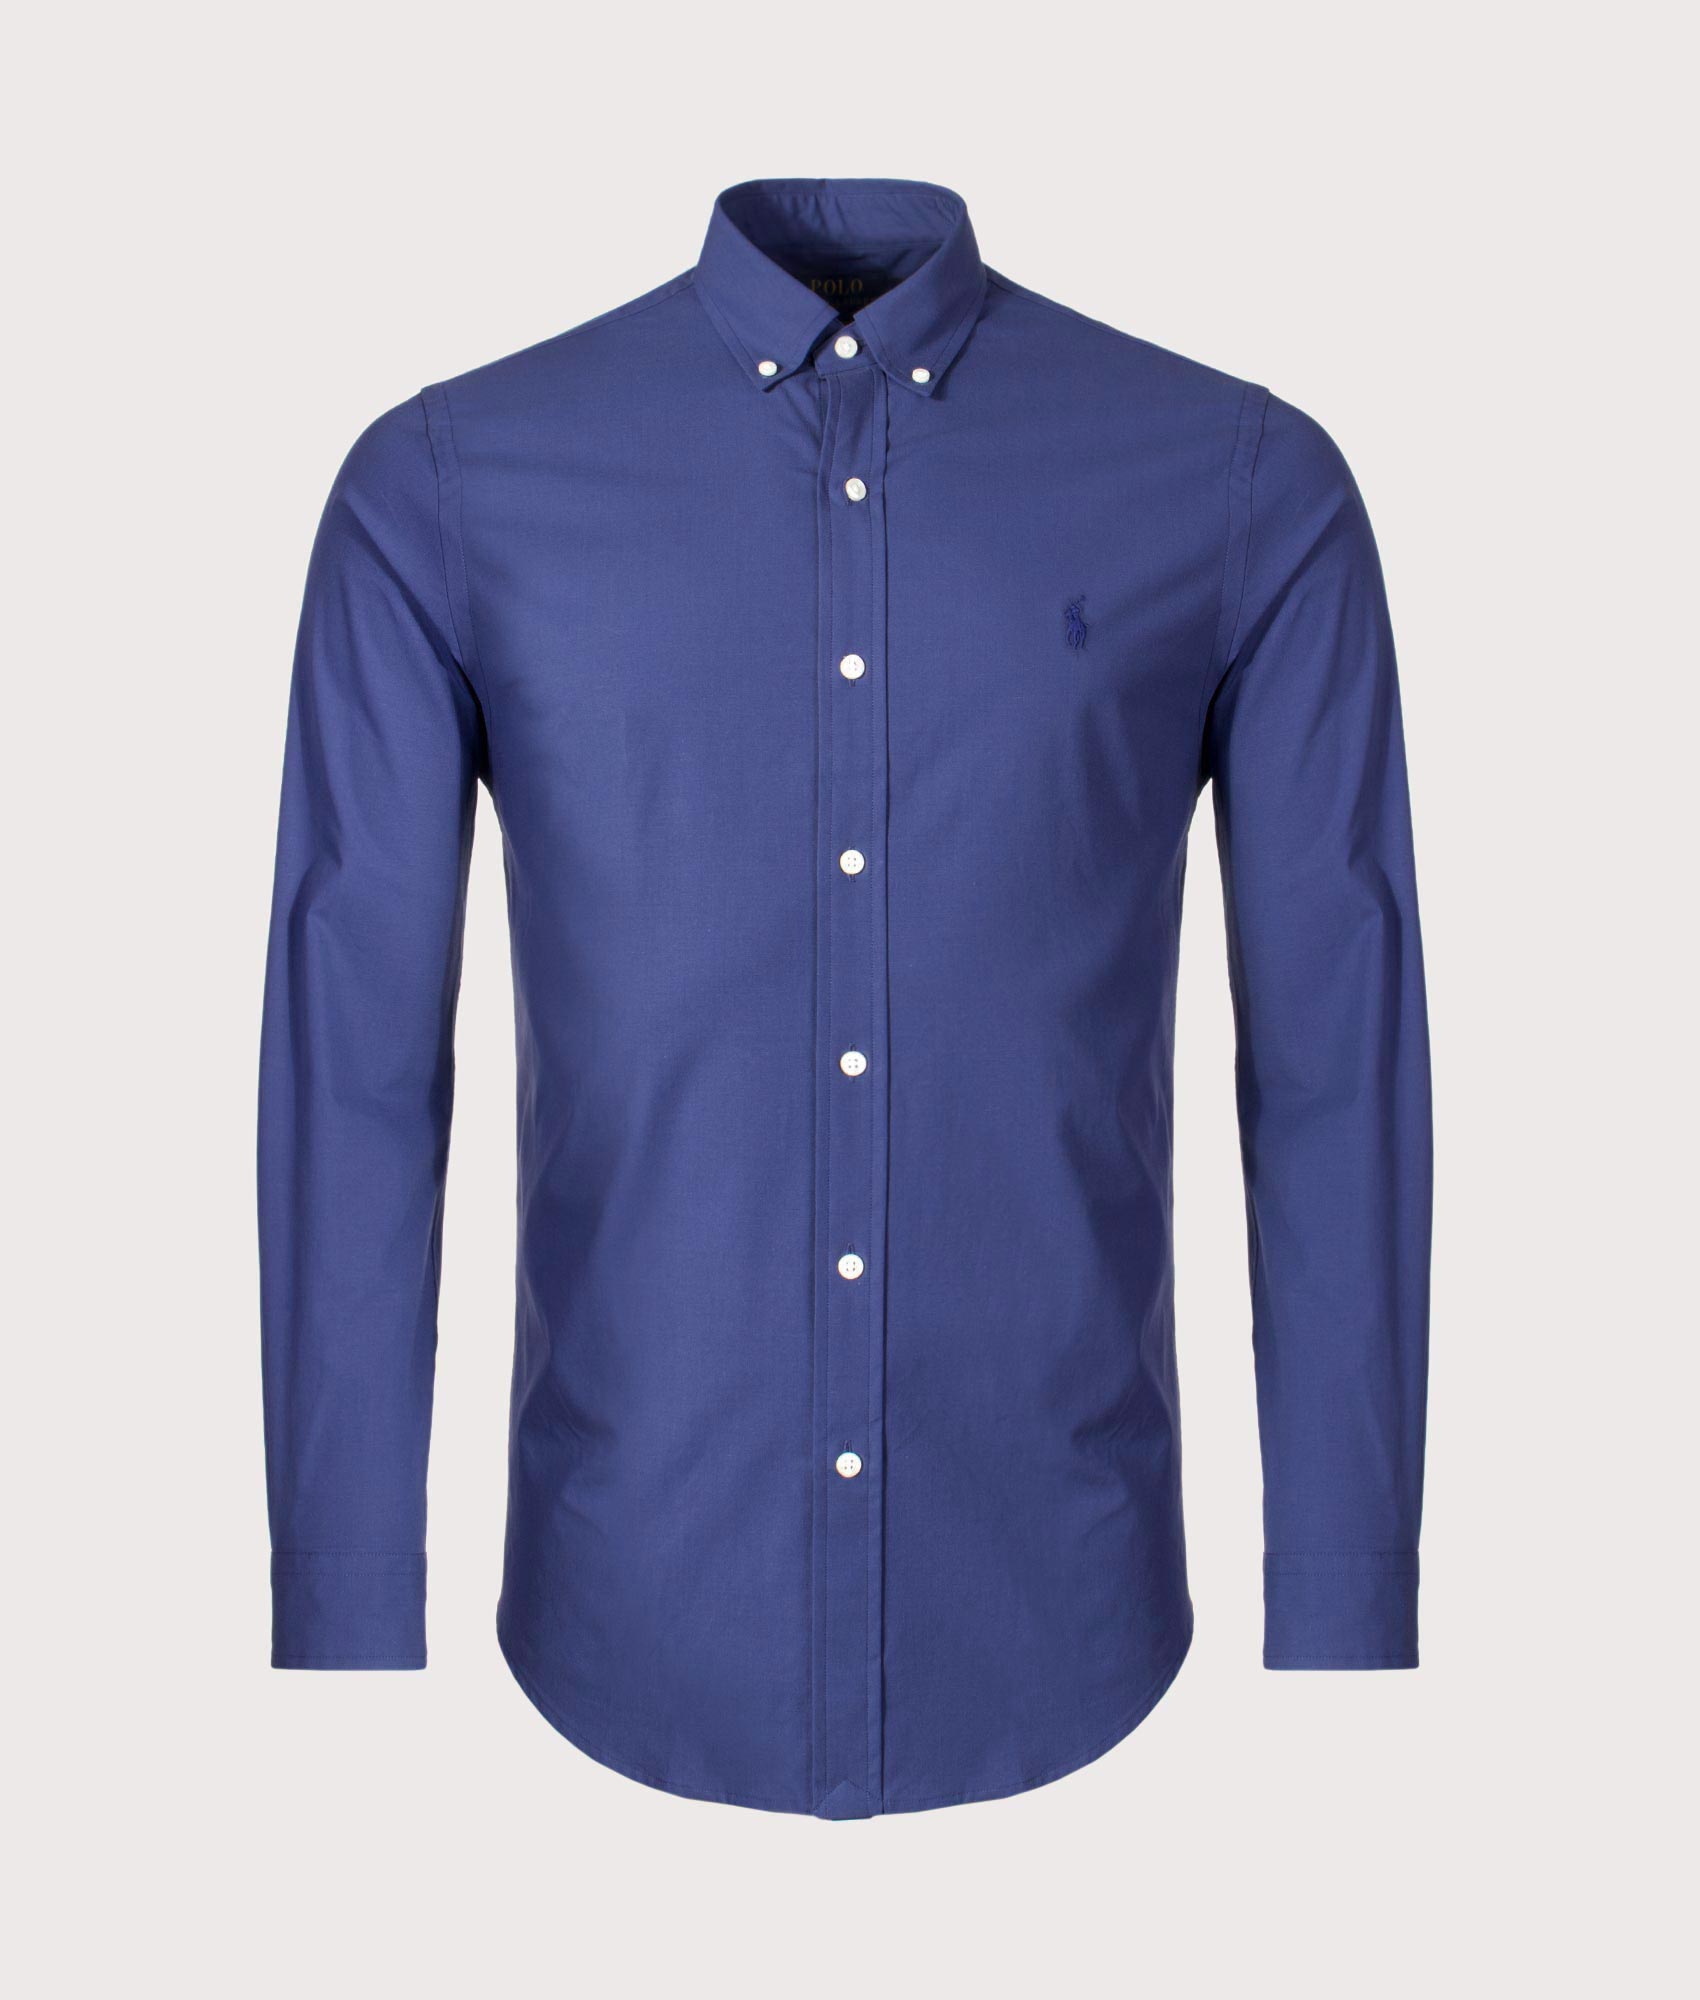 State of Matter Oceaya Polo Slim Fit - Navy - Blue - XS